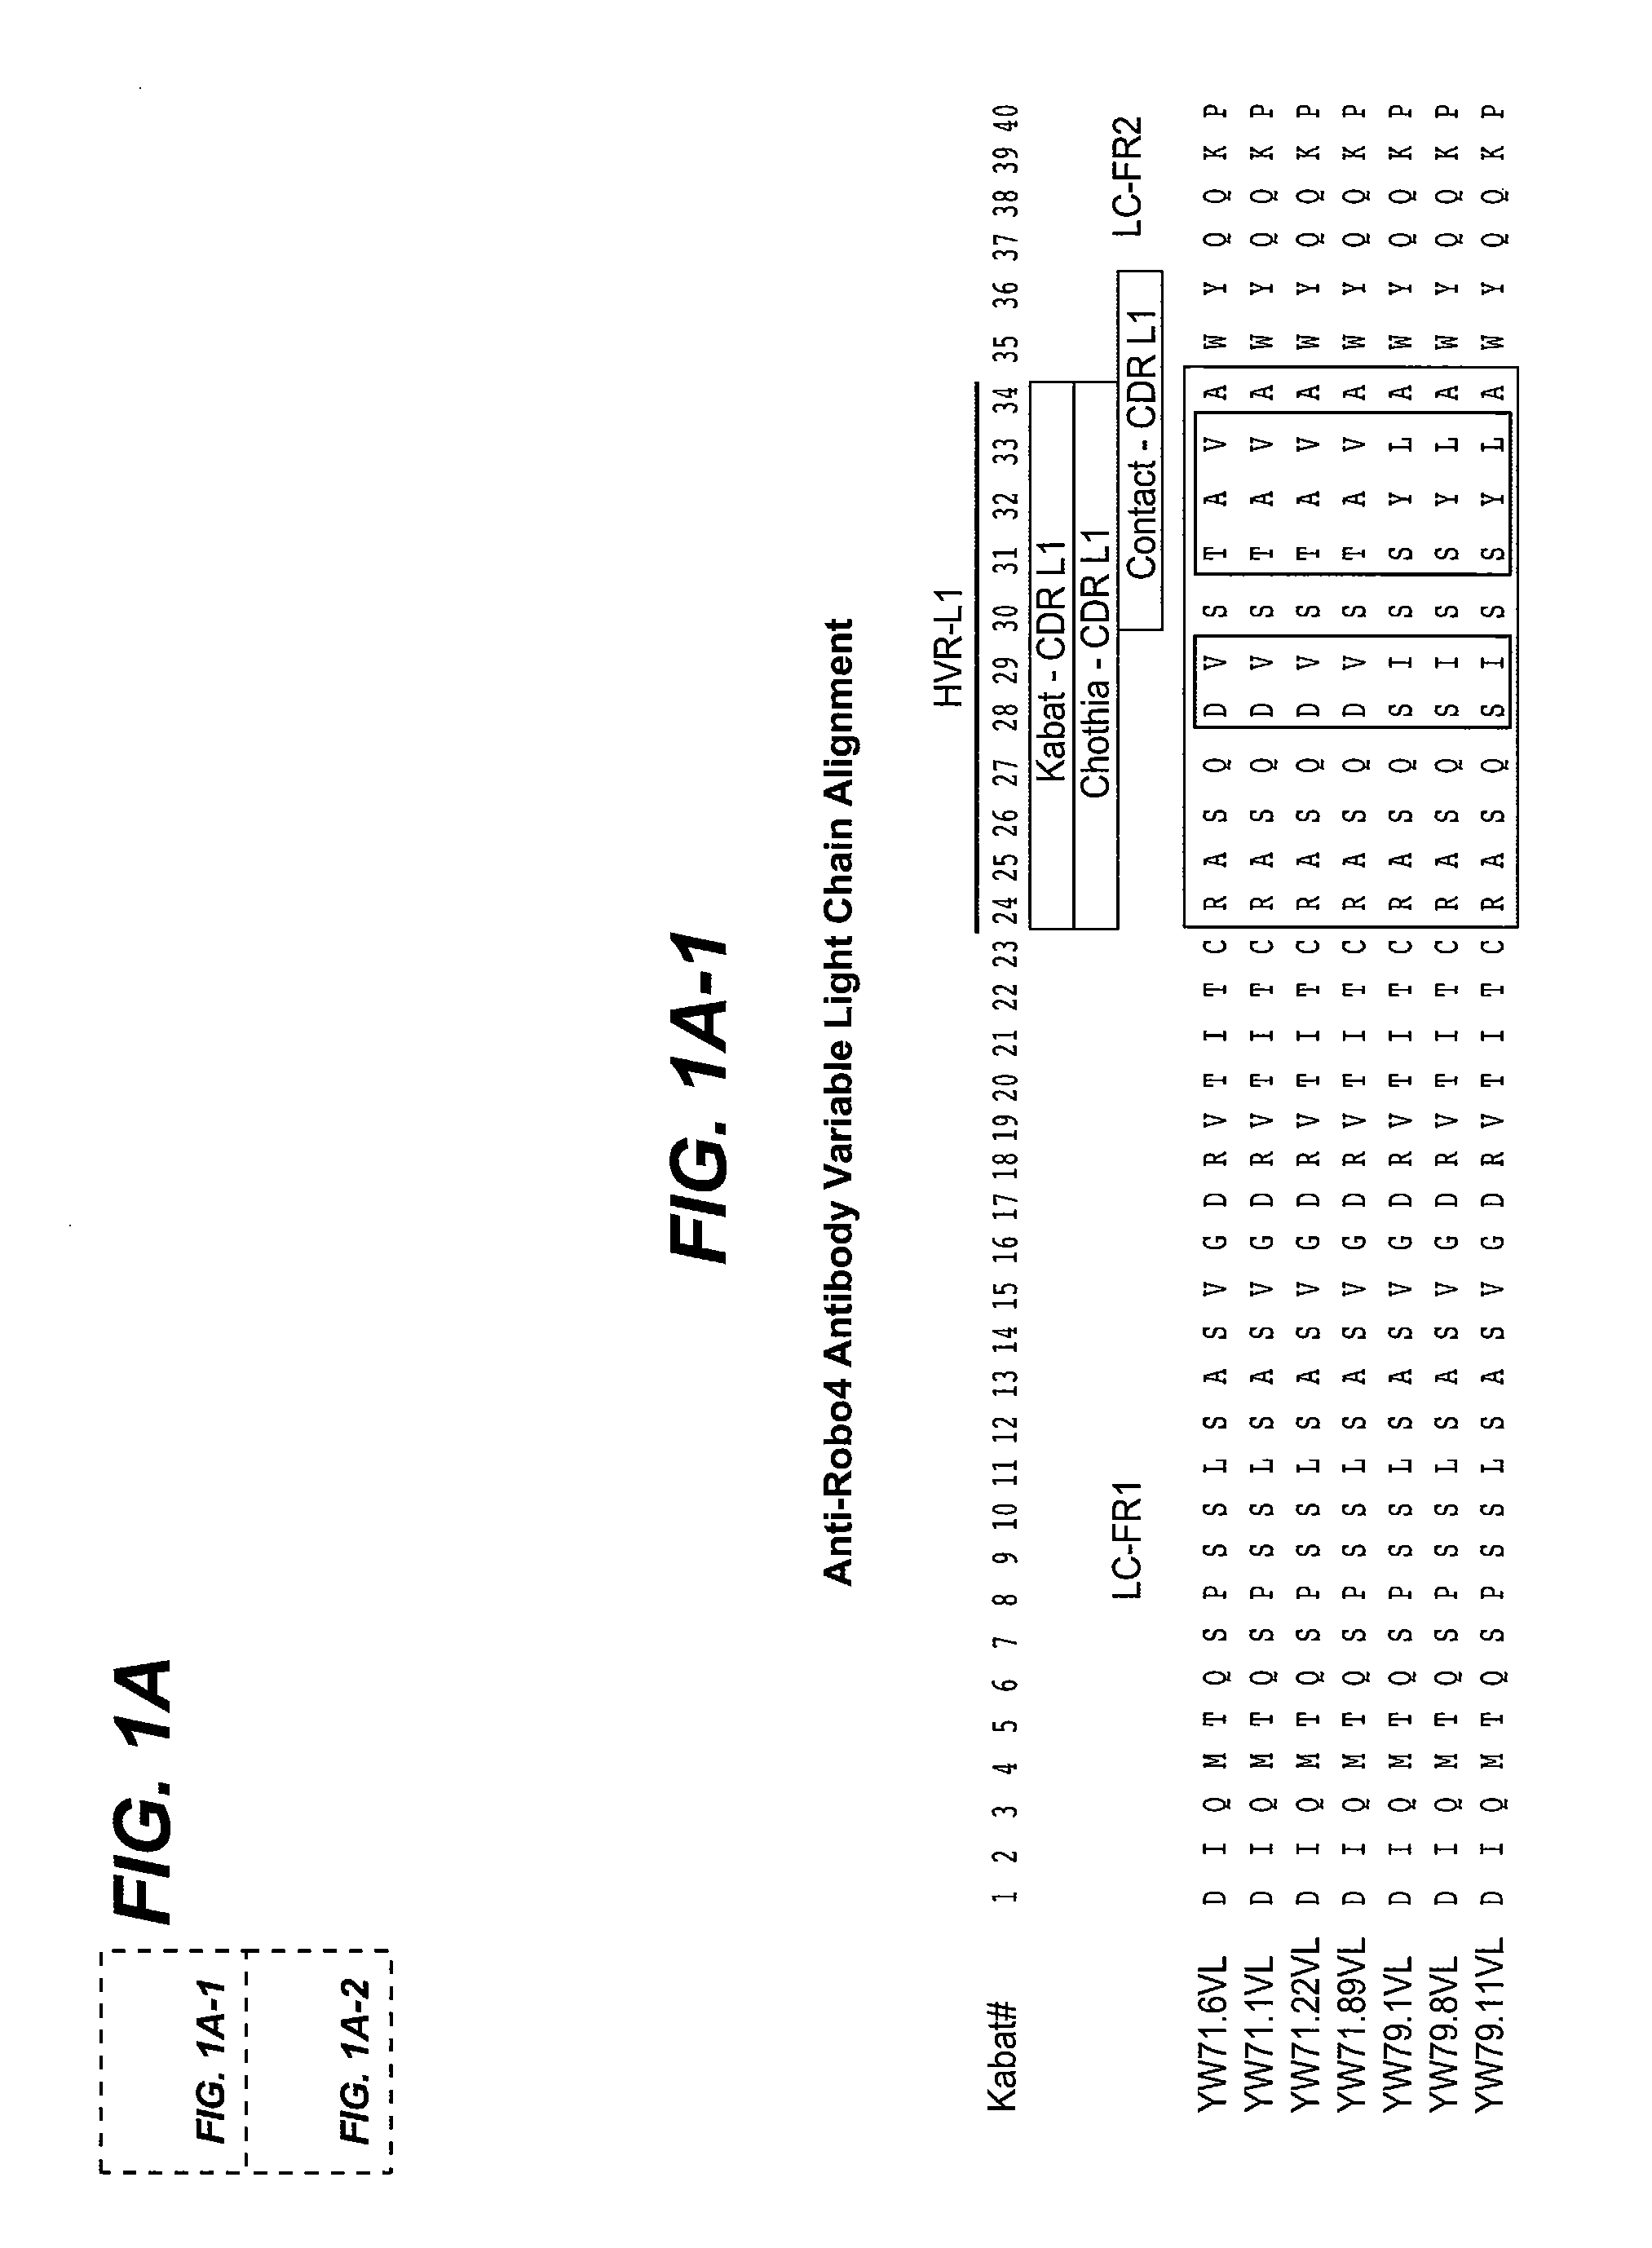 Anti-robo4 antibodies and uses therefor